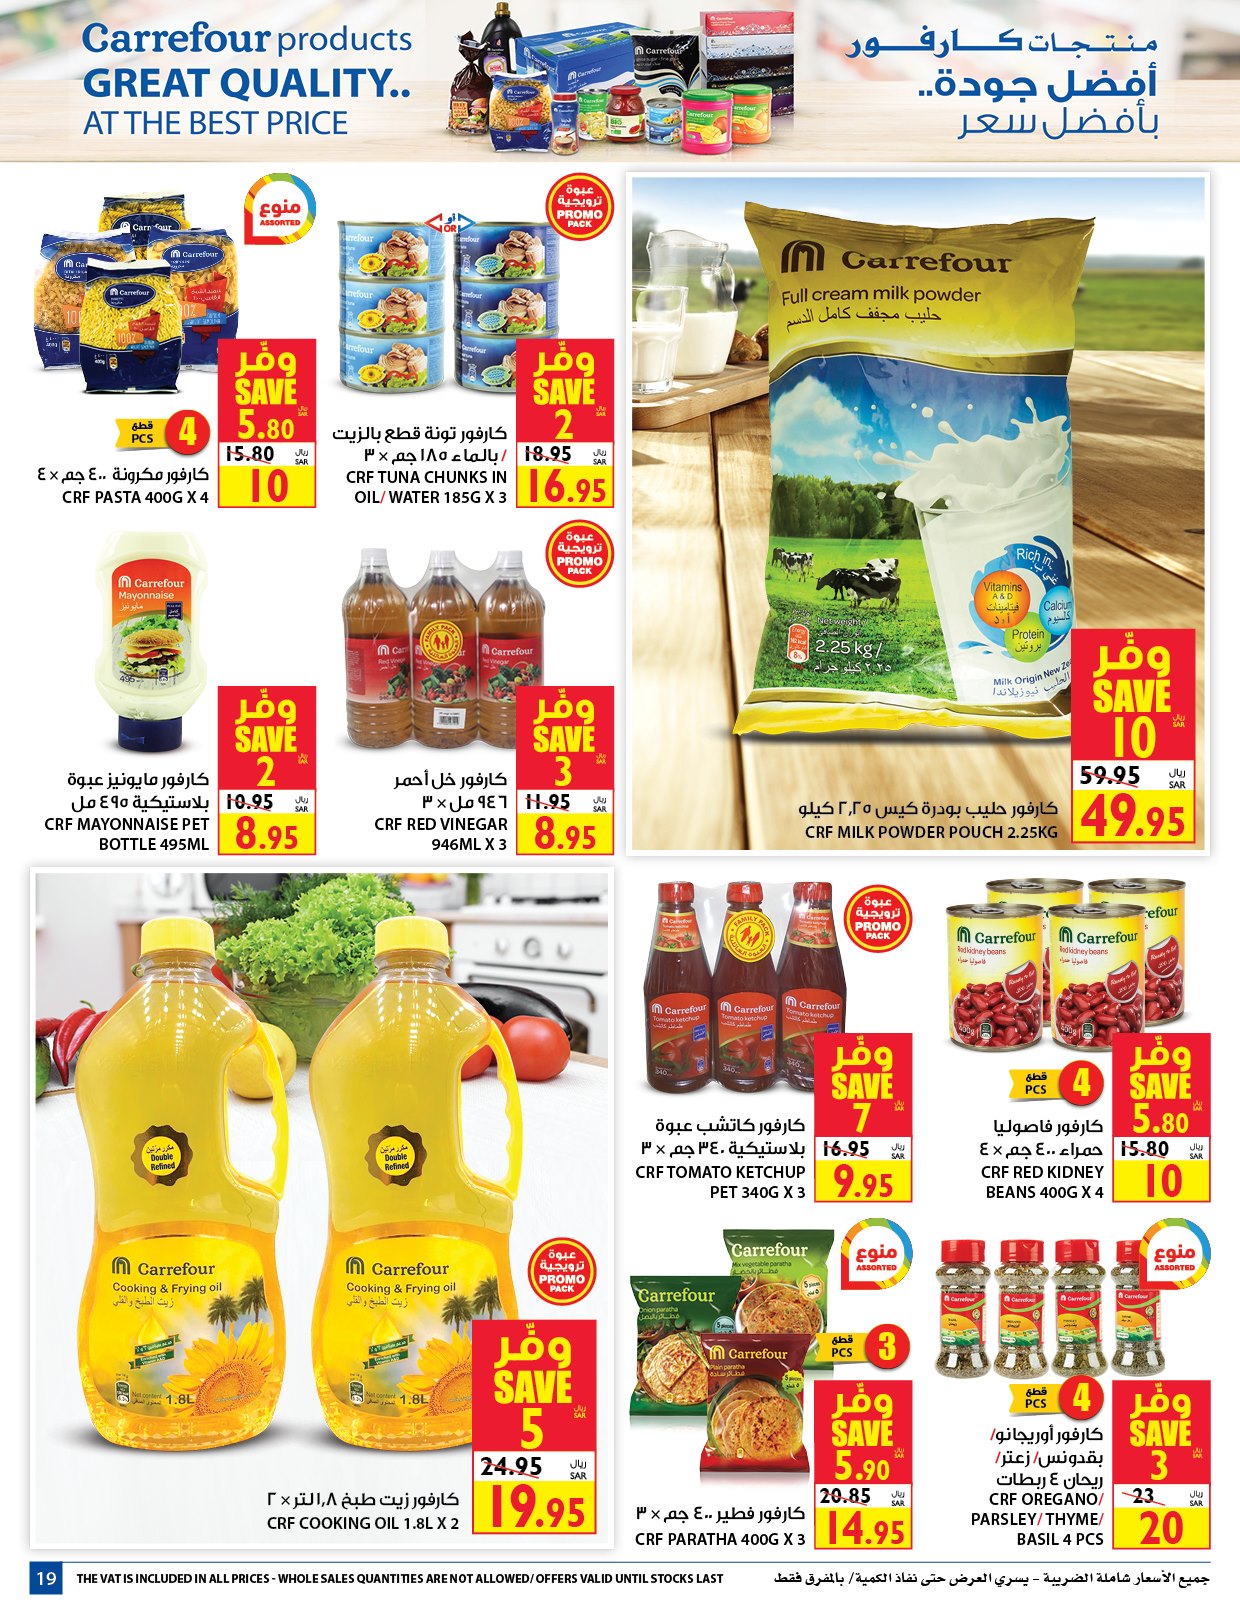 Carrefour Festival Offers from 12/8 till 25/8 | Carrefour KSA 20